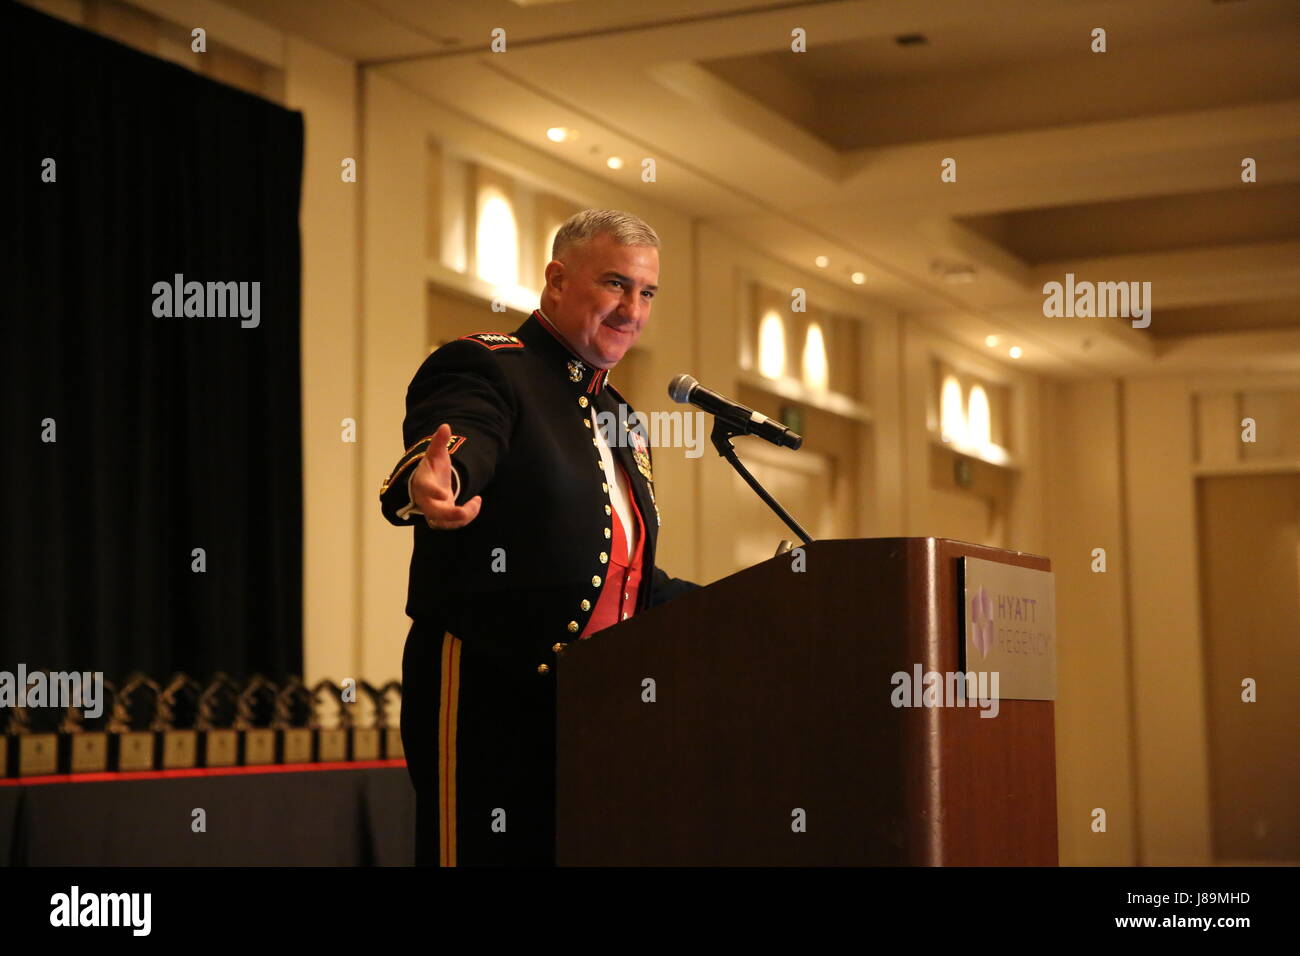 The Assistant Commandant of the Marine Corps, Gen. Glenn Walters, addresses the audience as the guest speaker of the Marine Corps Aviation Association’s 46th Annual Symposium and Awards Banquet at the Hyatt Regency Hotel in La Jolla, California, May 19. The MCAA awards program was founded in 1962 and since then has recognized excellence in Marine aviation through education, activities, media, events and its awards program. 3rd Marine Aircraft Wing received six individual awards and three squadron awards. (U.S. Marine Corps photo by Cpl. Harley Robinson/released) Stock Photo